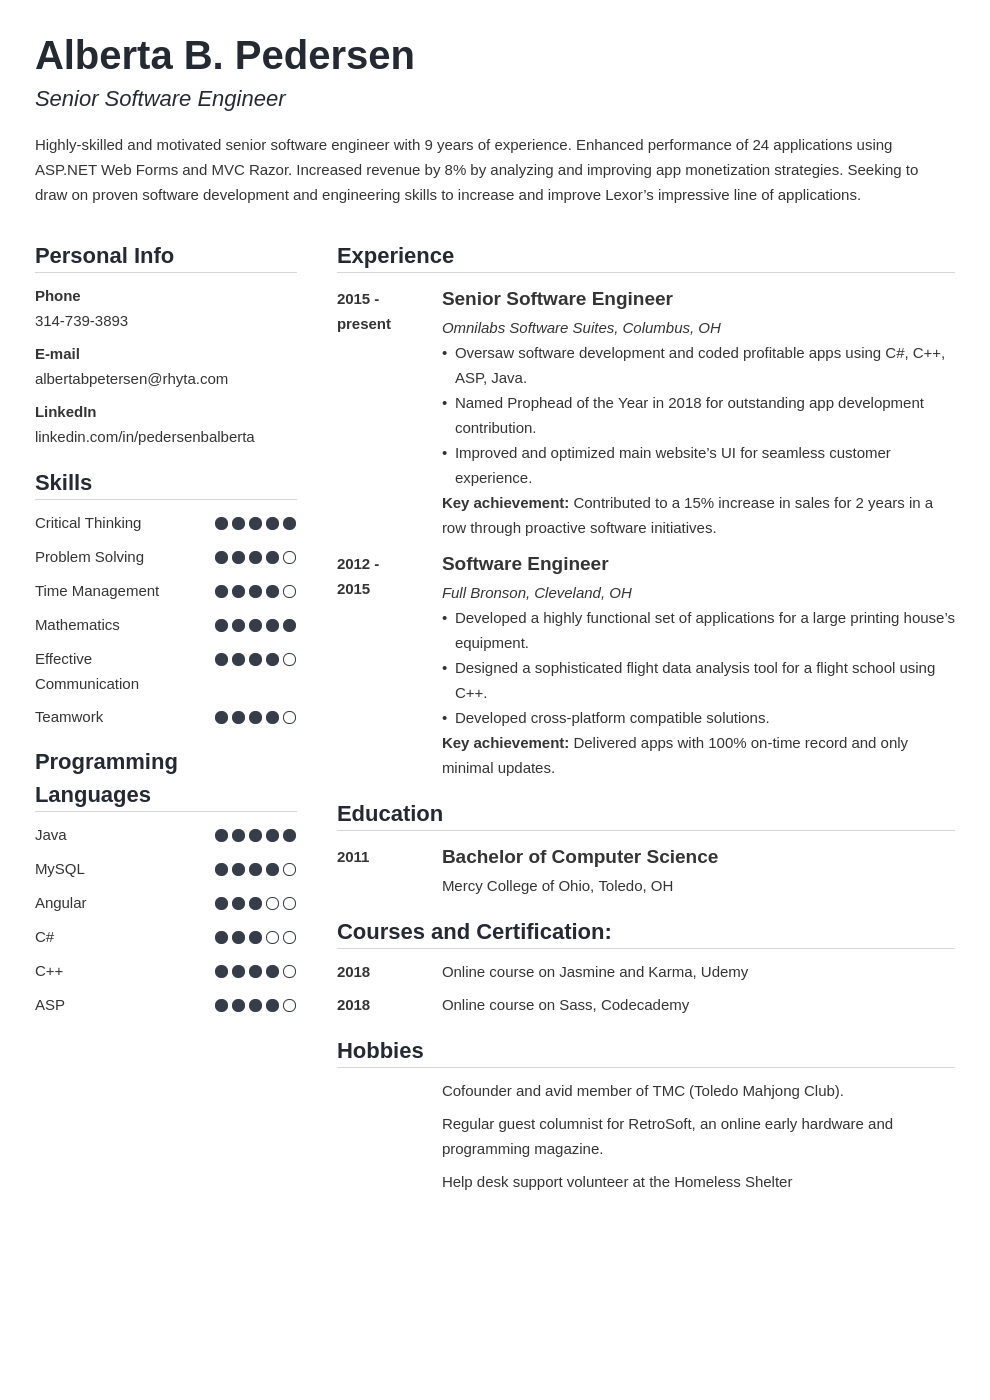 Senior Software Engineer Resume Examples & Guide (25 Tips)